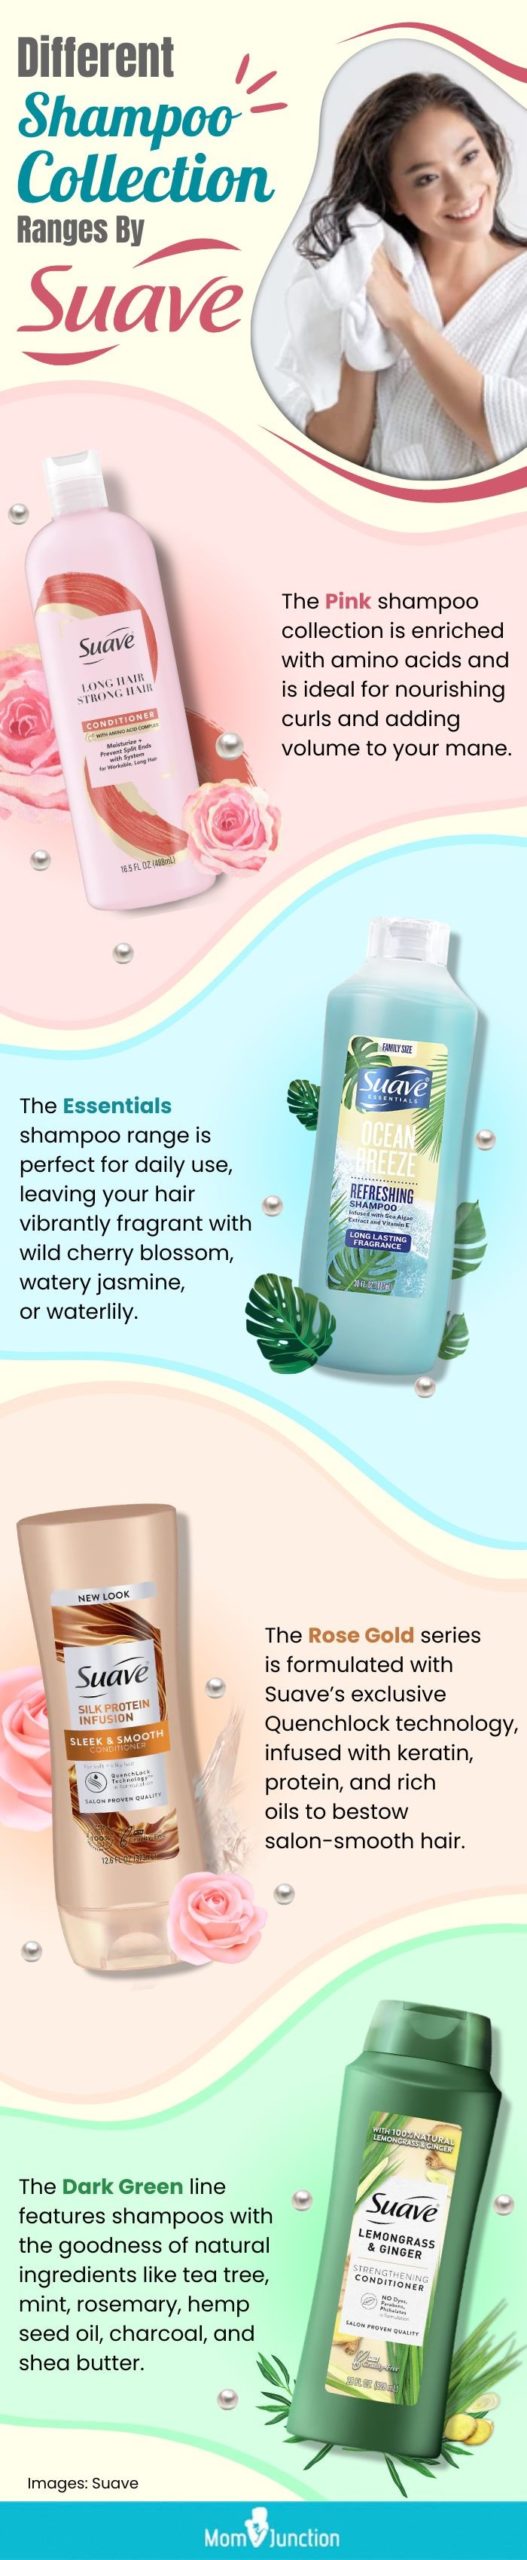 Different Shampoo Collection Ranges By Suave (infographic)